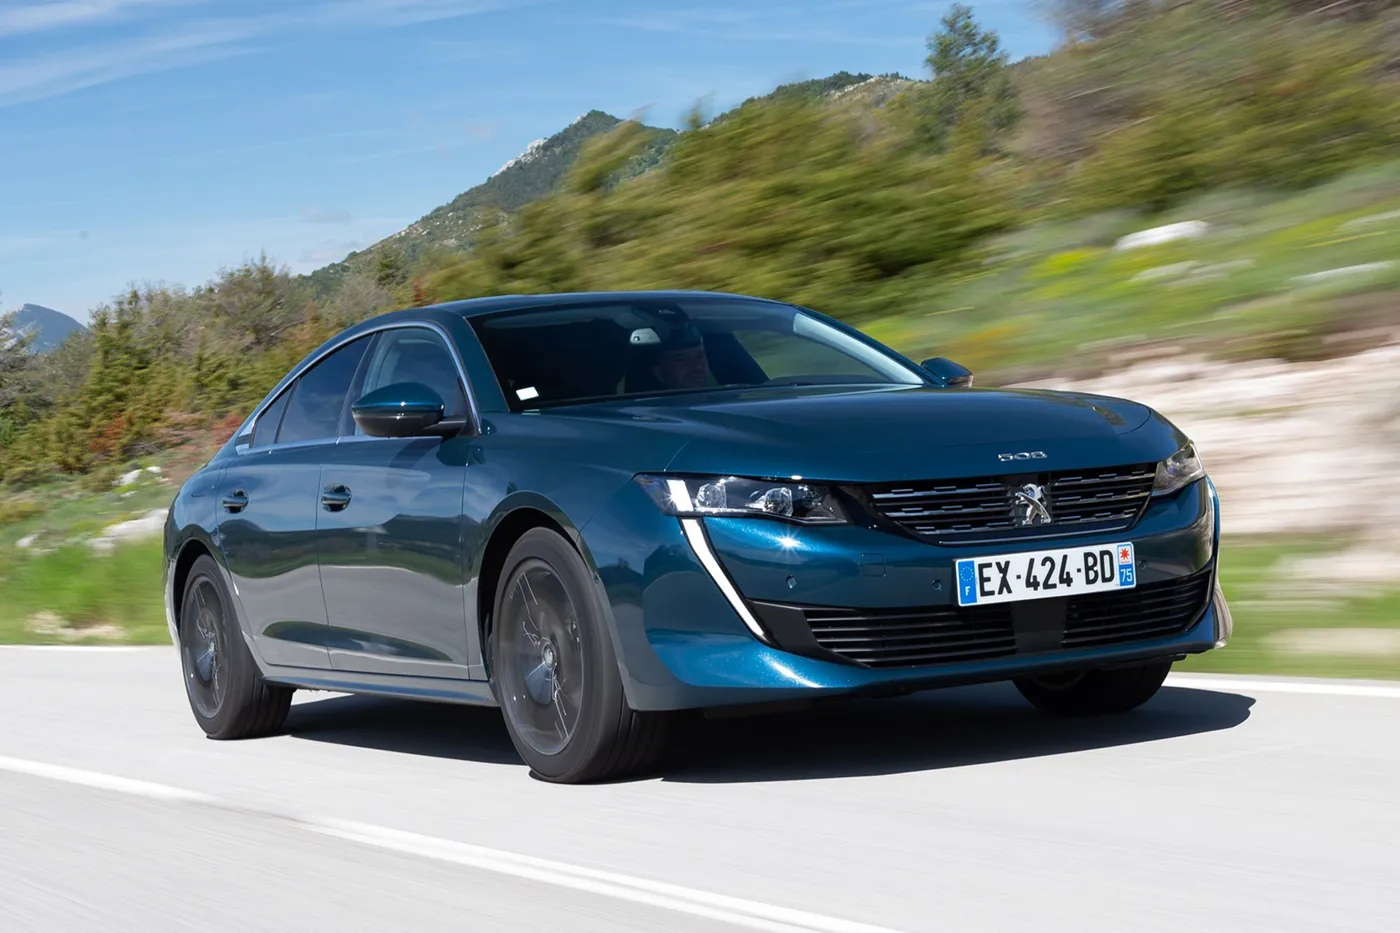 Upmarket Peugeot 508 impresses with 98g/km CO2 emissions, first drive